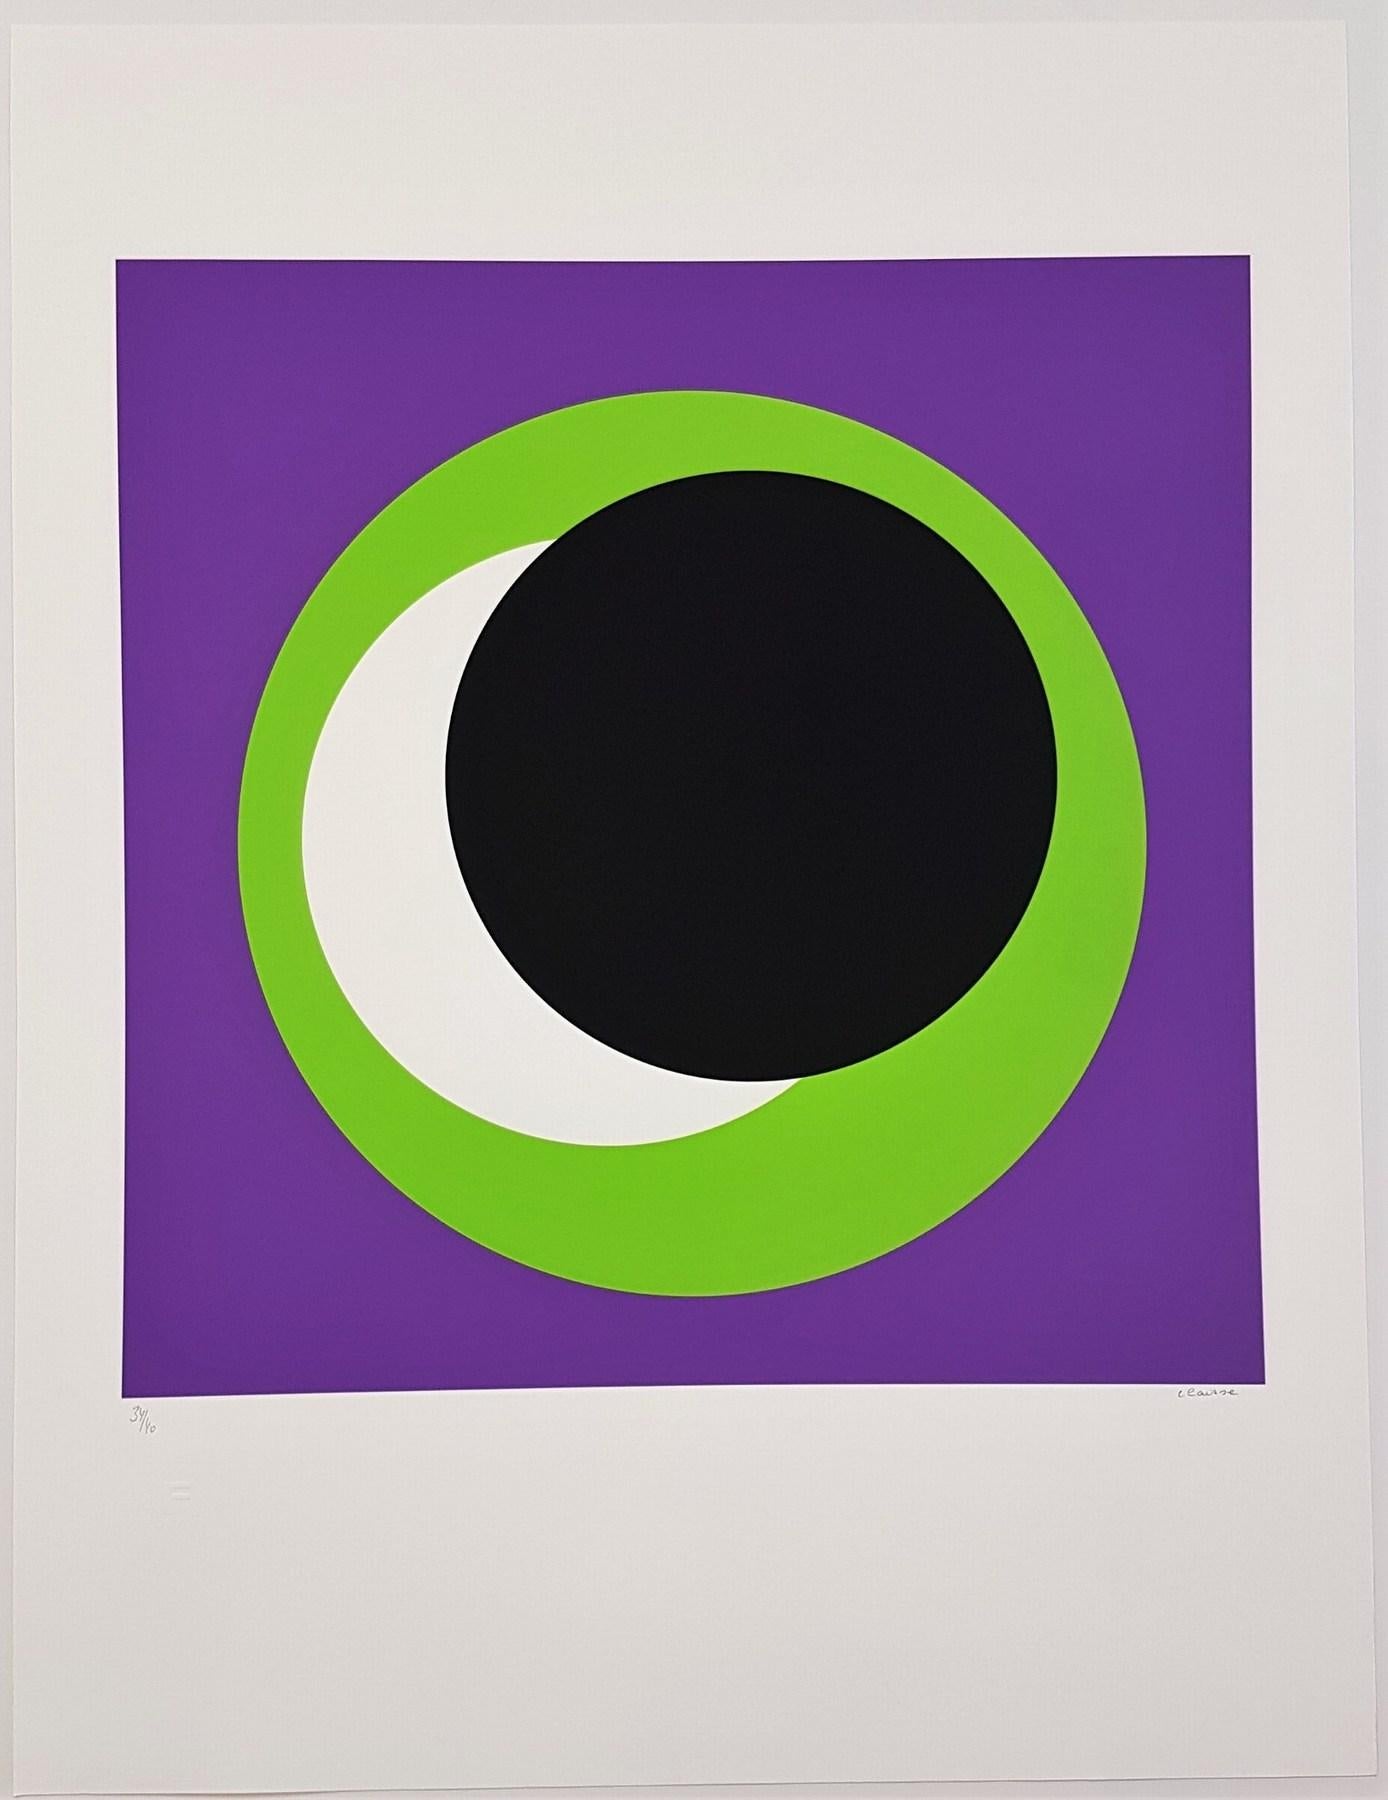 Black and Green Circle (Cercle noir/vert) (Minimalism, Geometric Abstraction) - Print by Geneviève Claisse